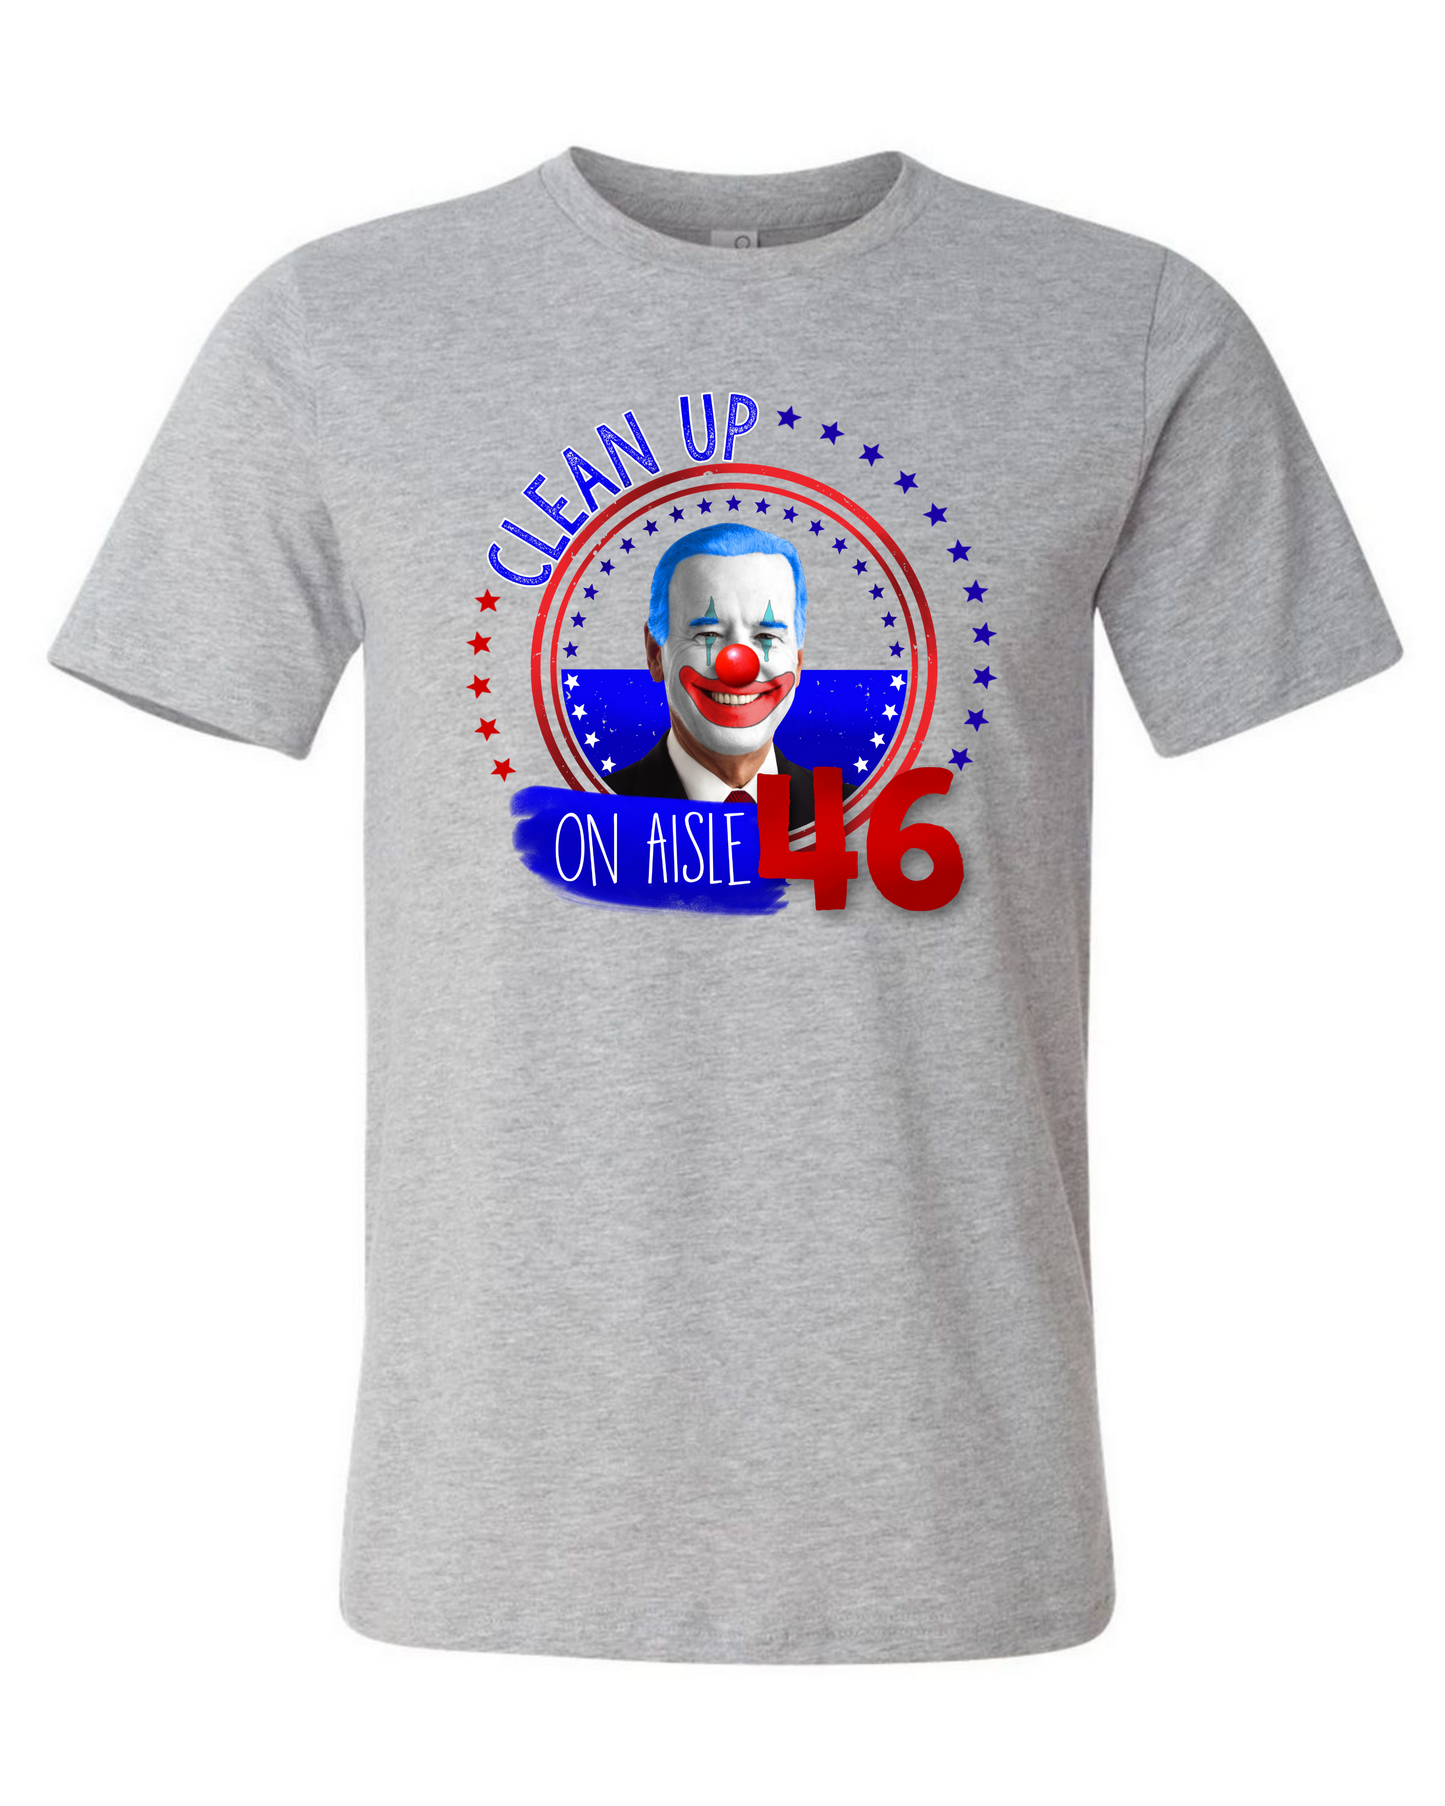 clean up on aisle 46 shirt